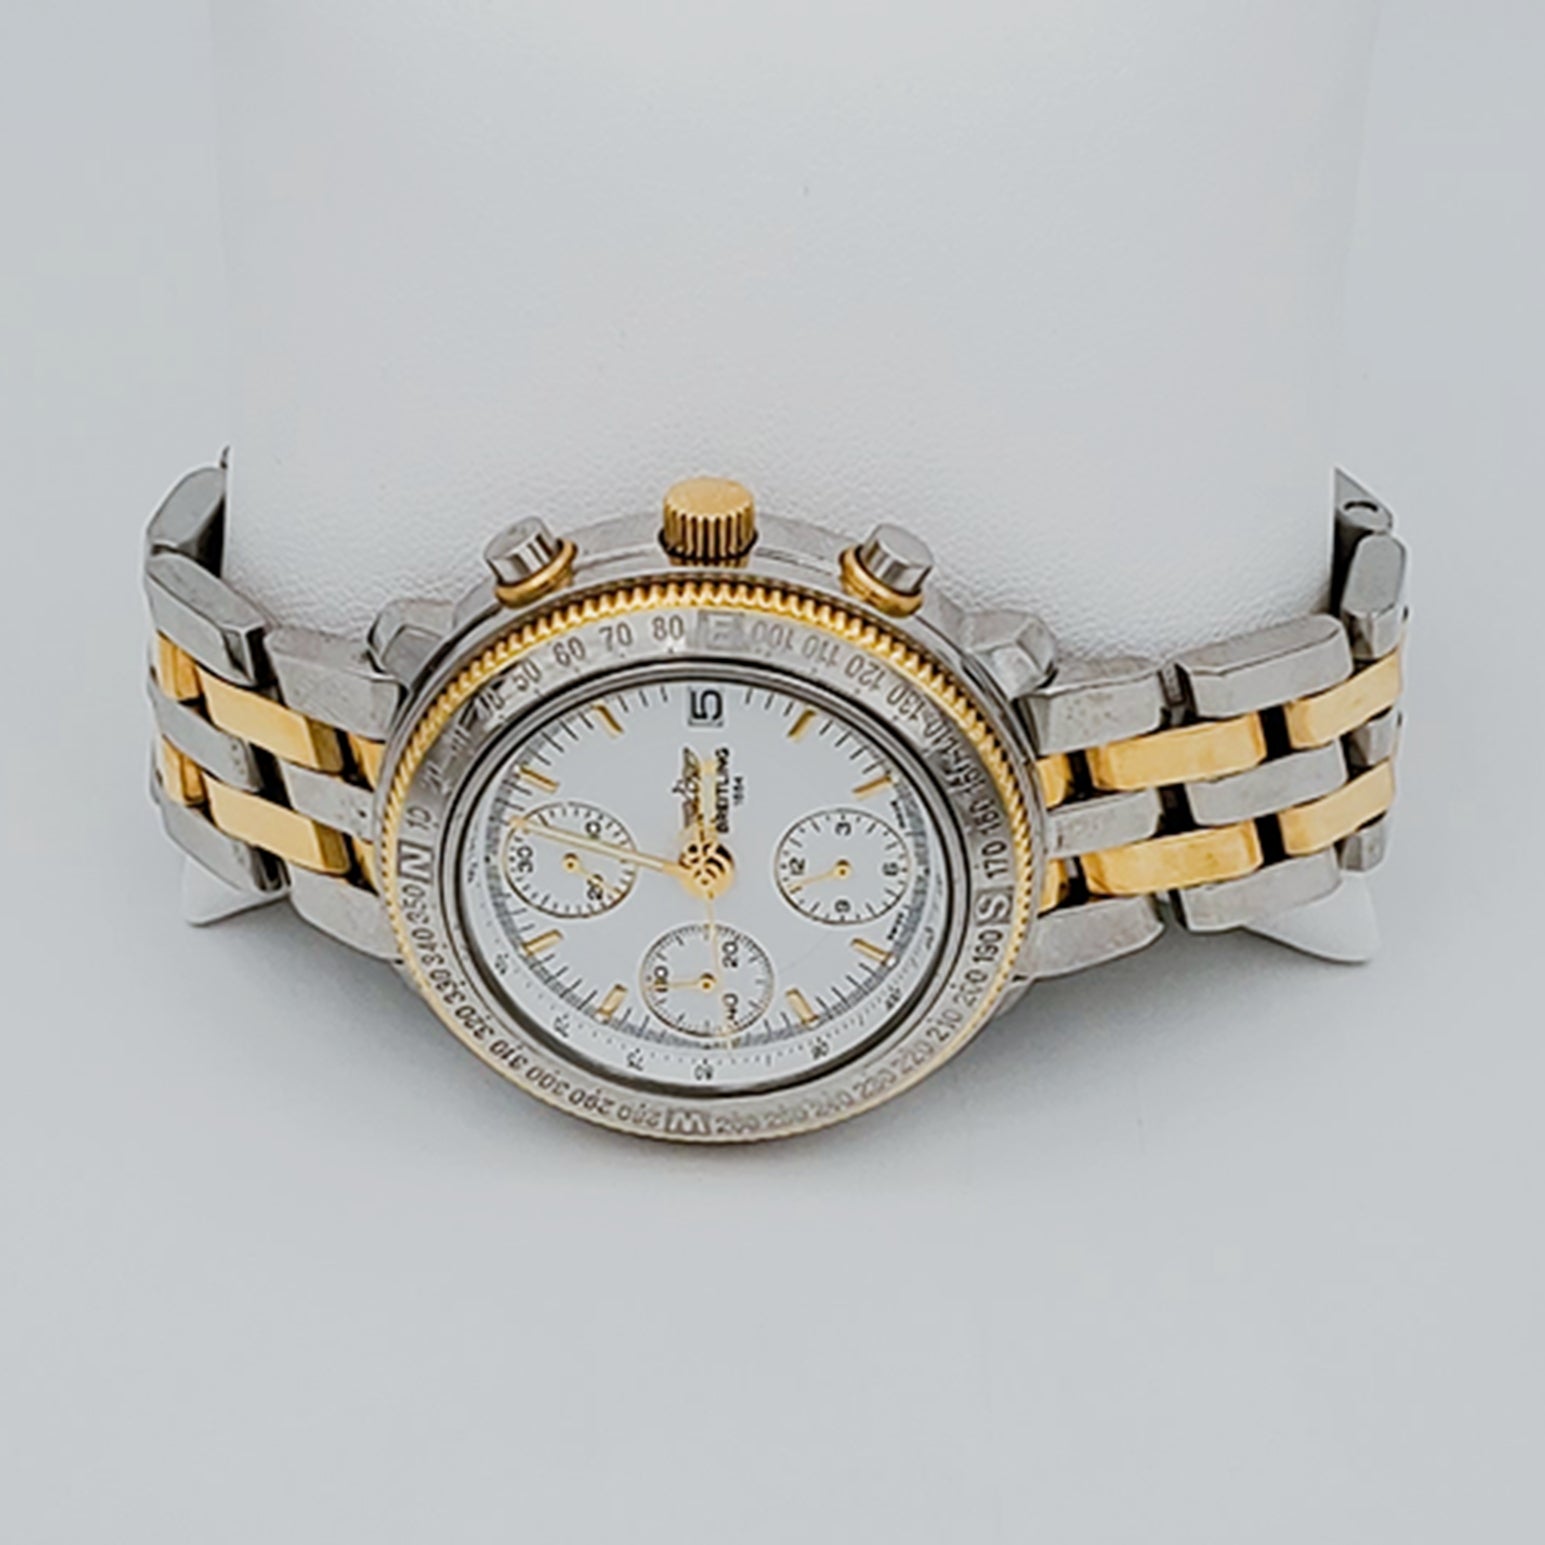 Men's Breitling D20405 Tachymeter 40mm 18K Yellow Gold / Stainless Steel Watch with White Dial and Gold Bezel. (Pre-Owned)